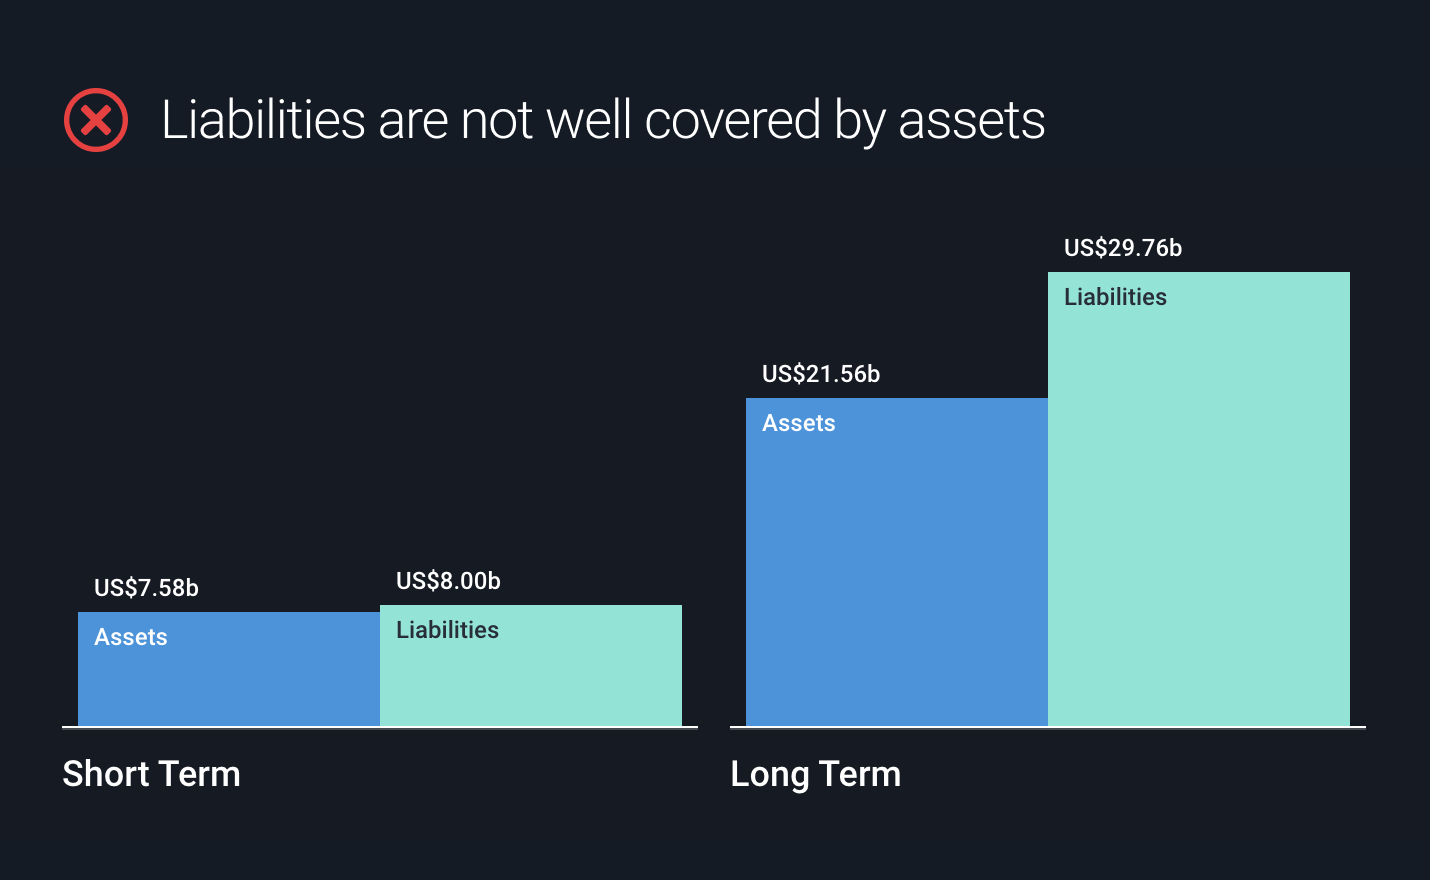 Financial Health measures with comparison between assets and liabilities, short term vs long term.